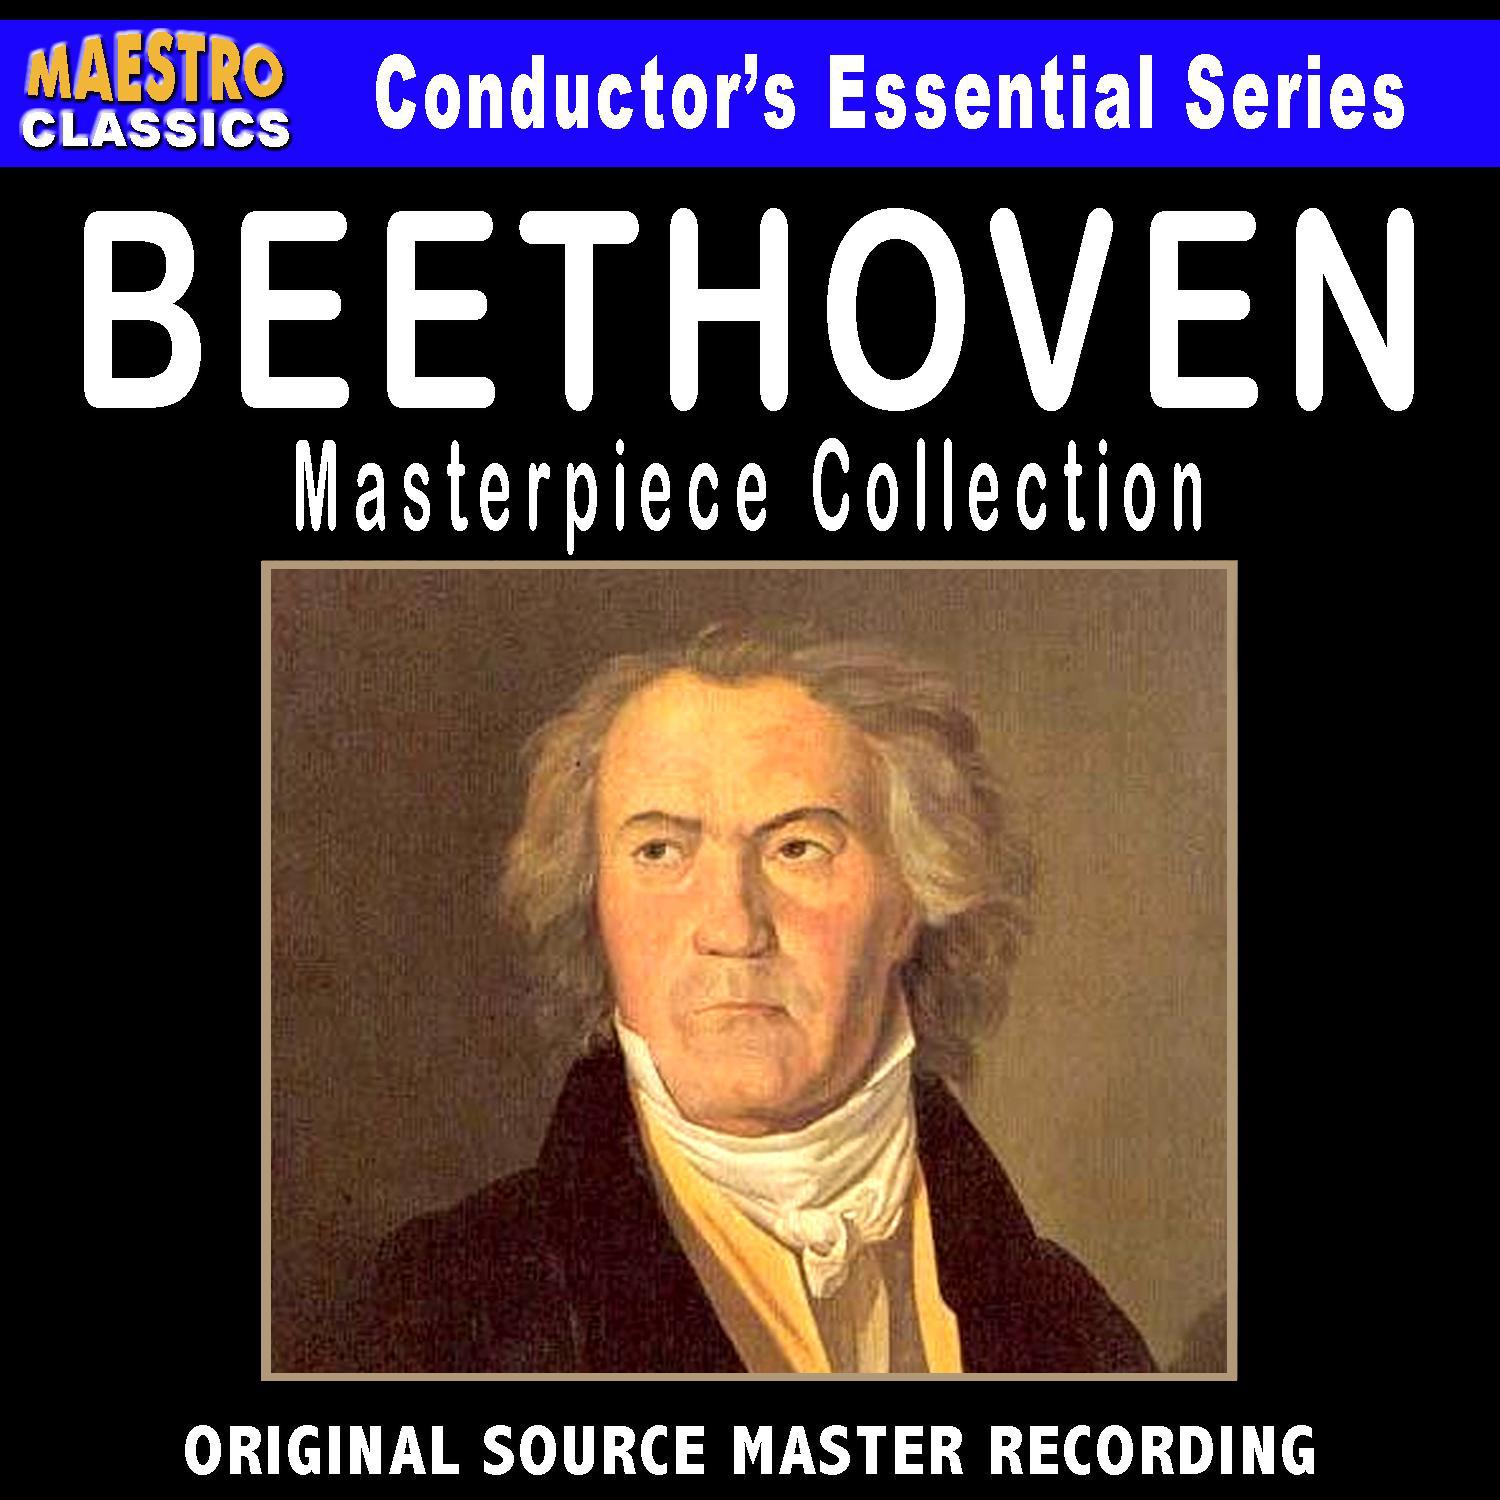 Beethoven - Masterpiece Collection